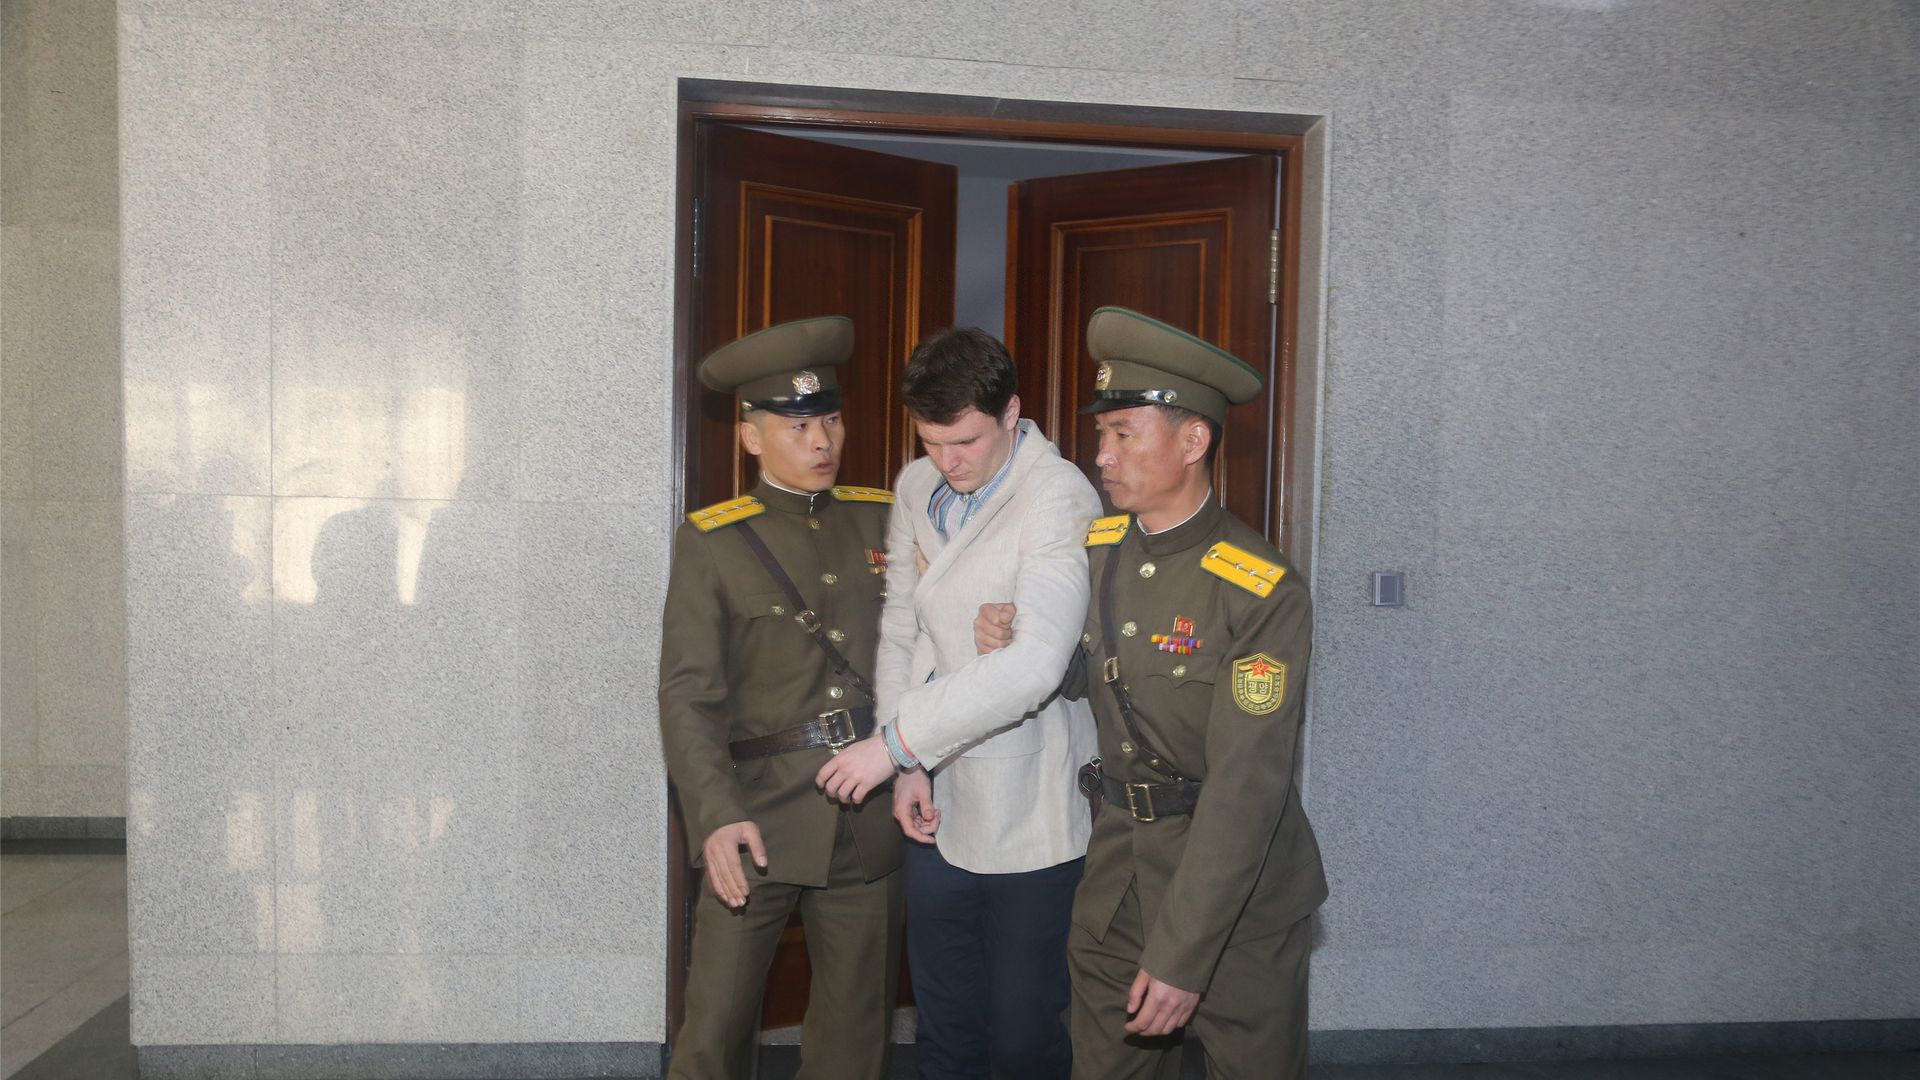 In this image, Otto Wambier is led through a doorway by two North Korean guards.